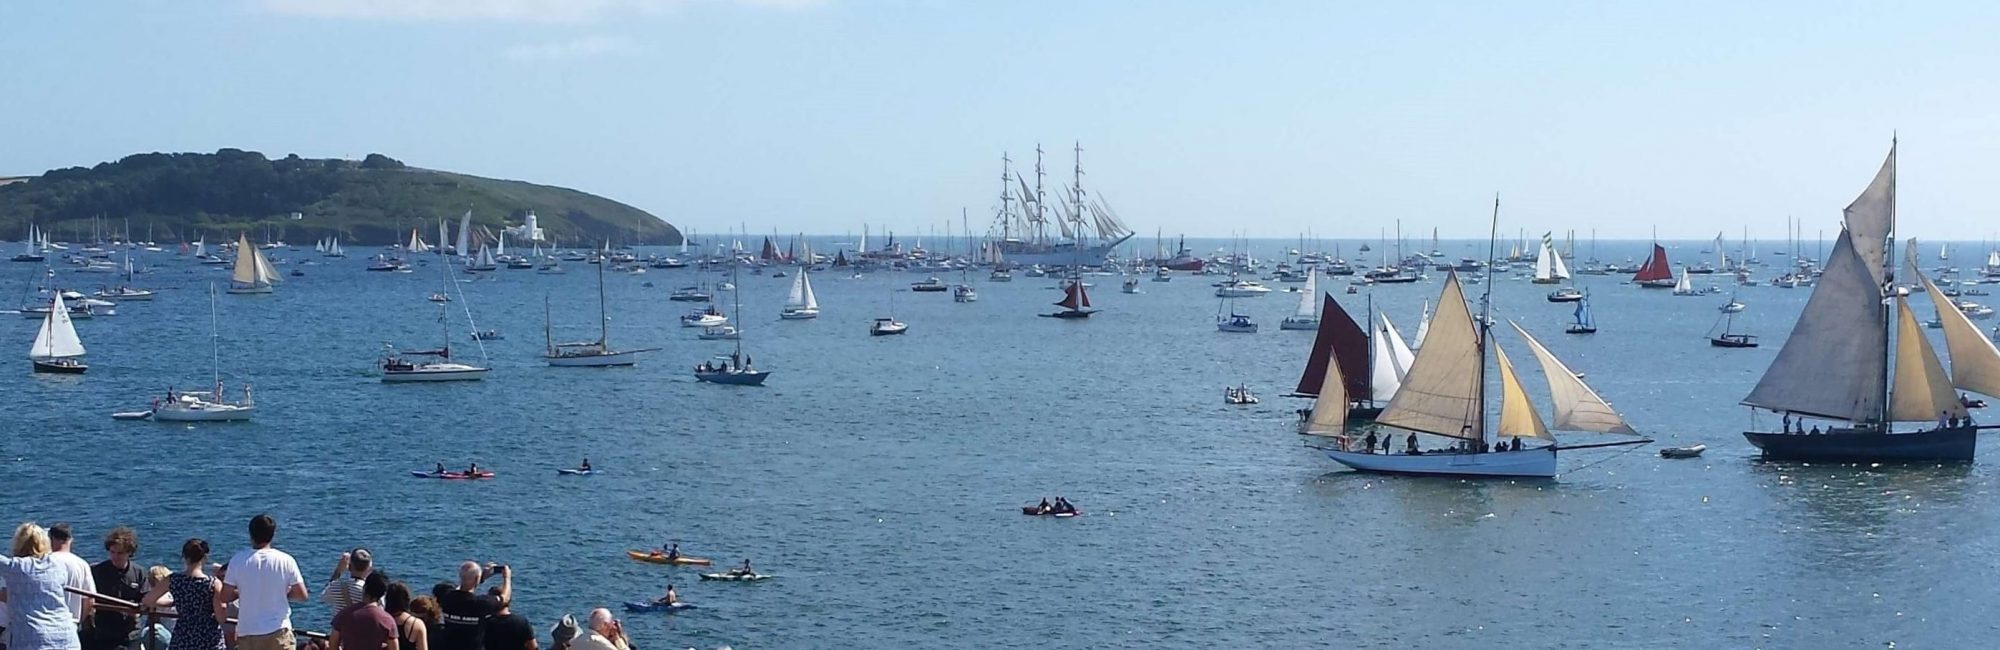 Tall Ships Race 2014s Falmouth events